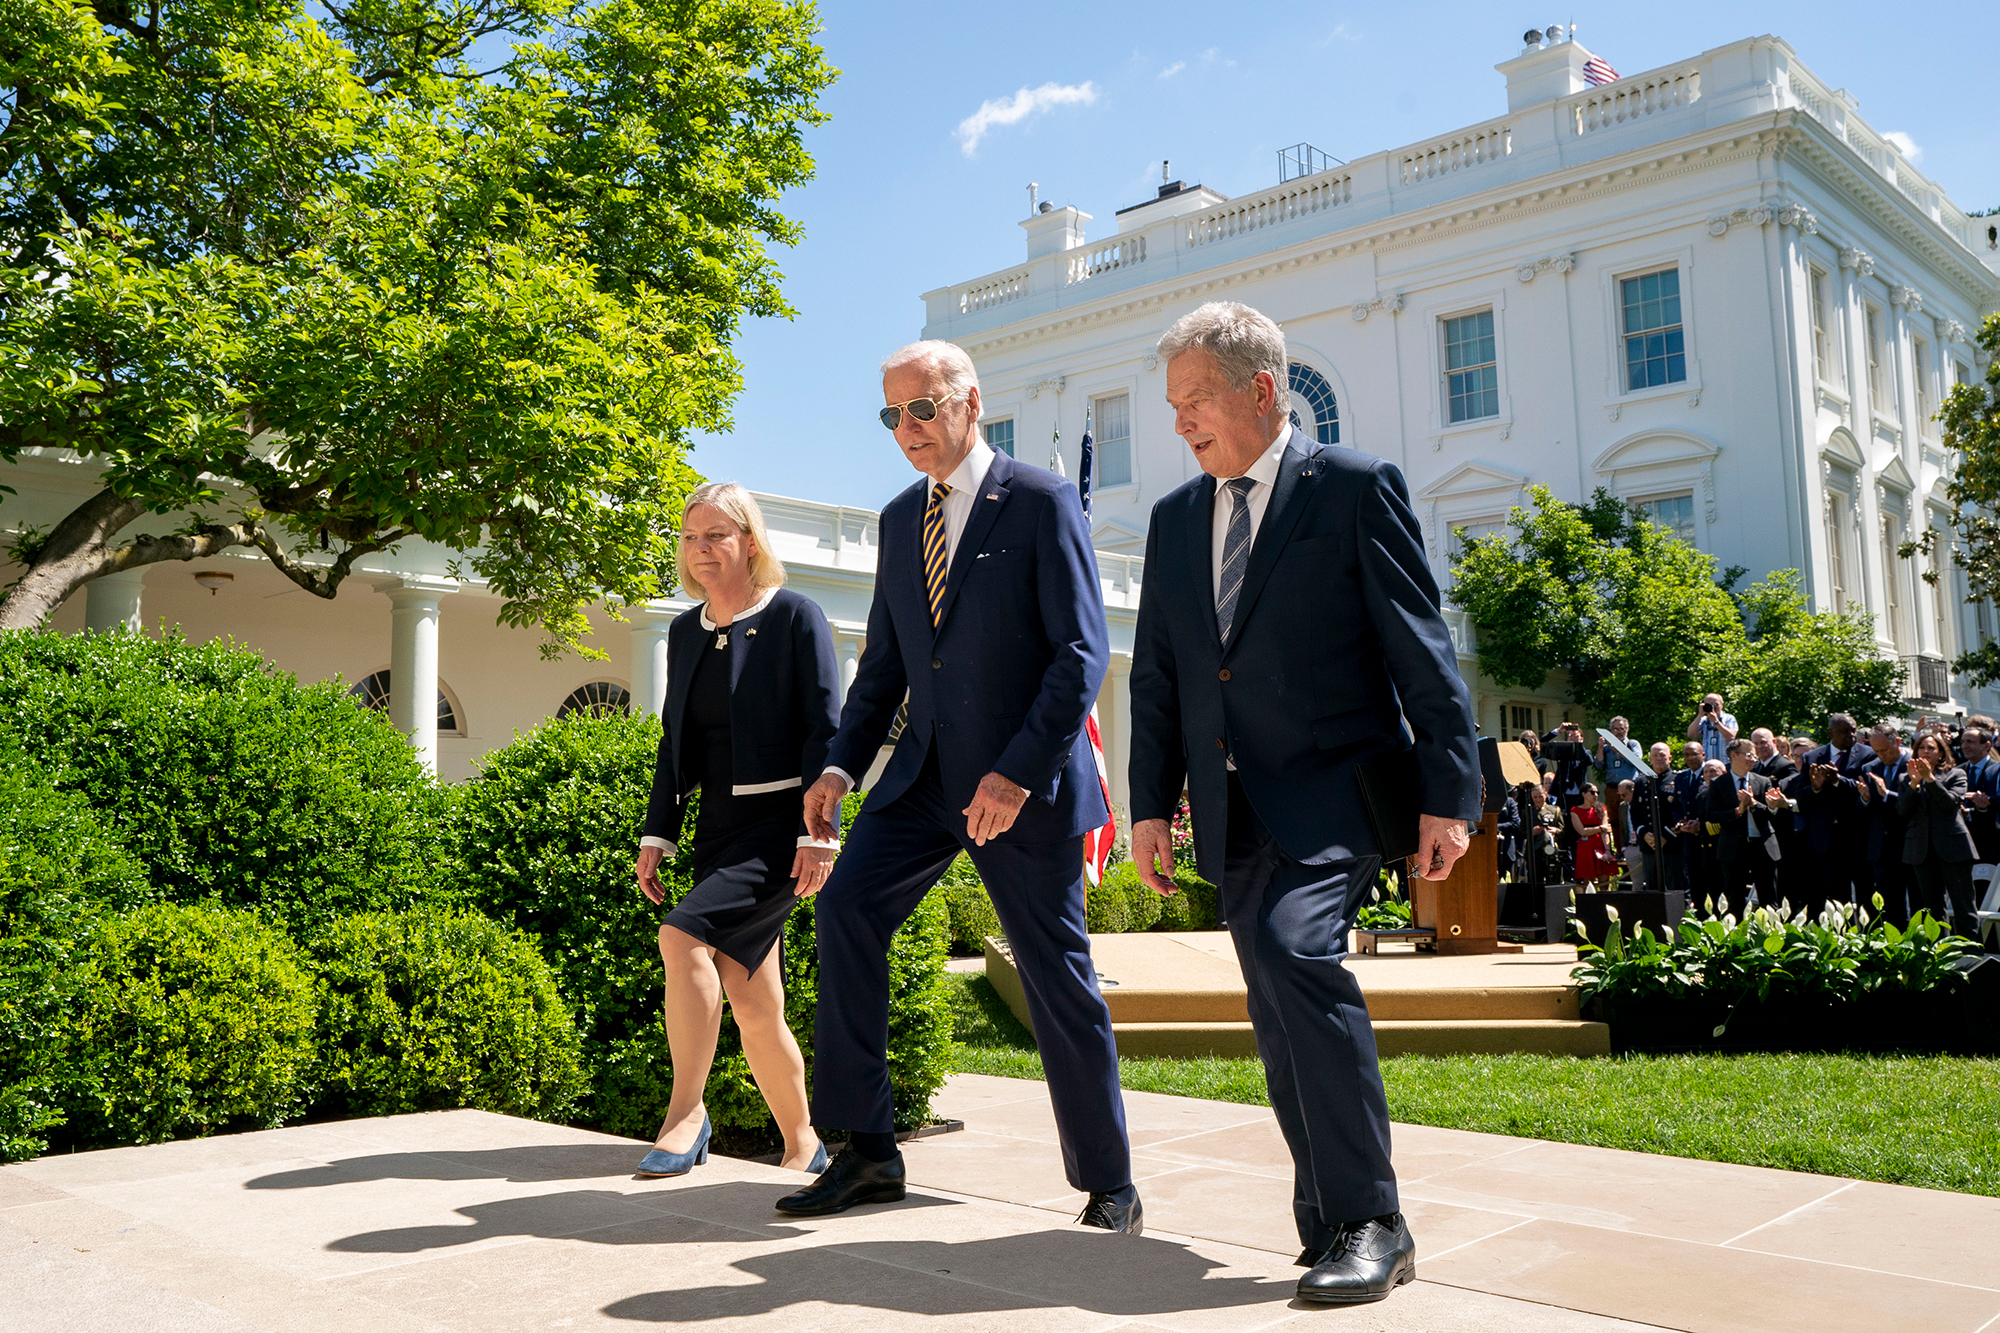 Swedish Prime Minister Magdalena Andersson, US President Joe Biden and Finnish President Sauli Niinistö depart the Rose Garden of the White House after speaking on May 19. 